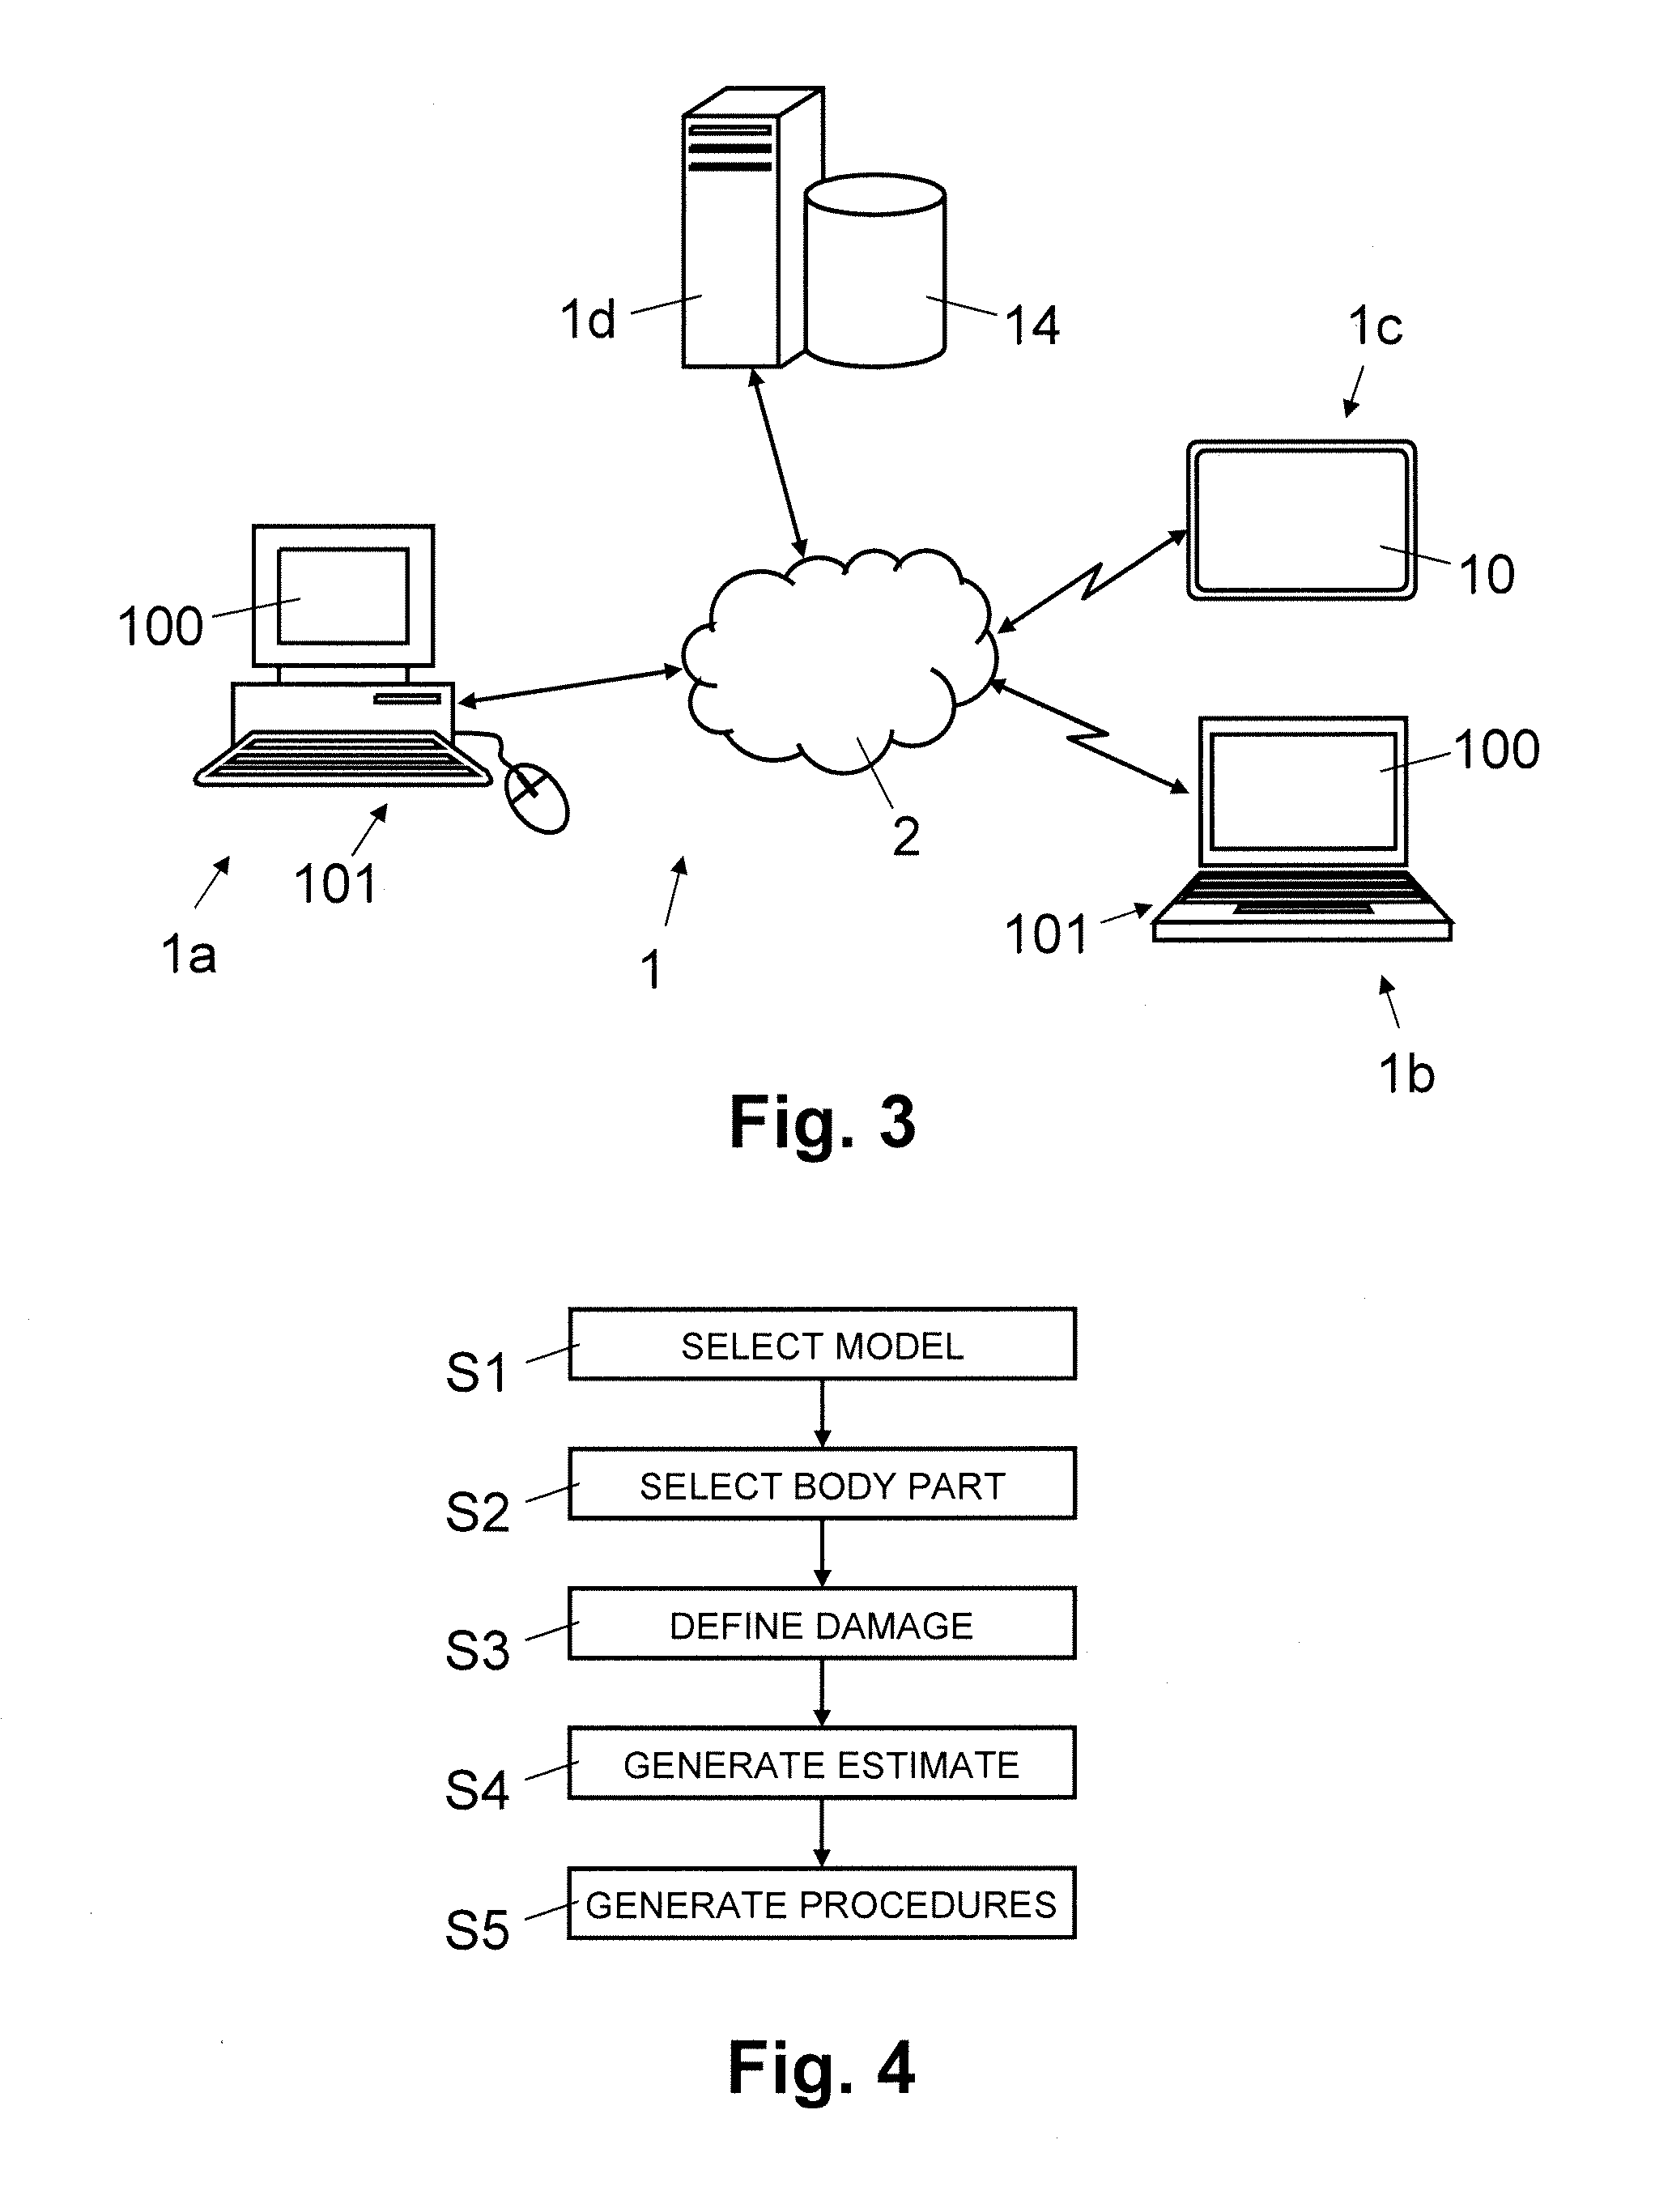 System and method for estimating collision damage to a car